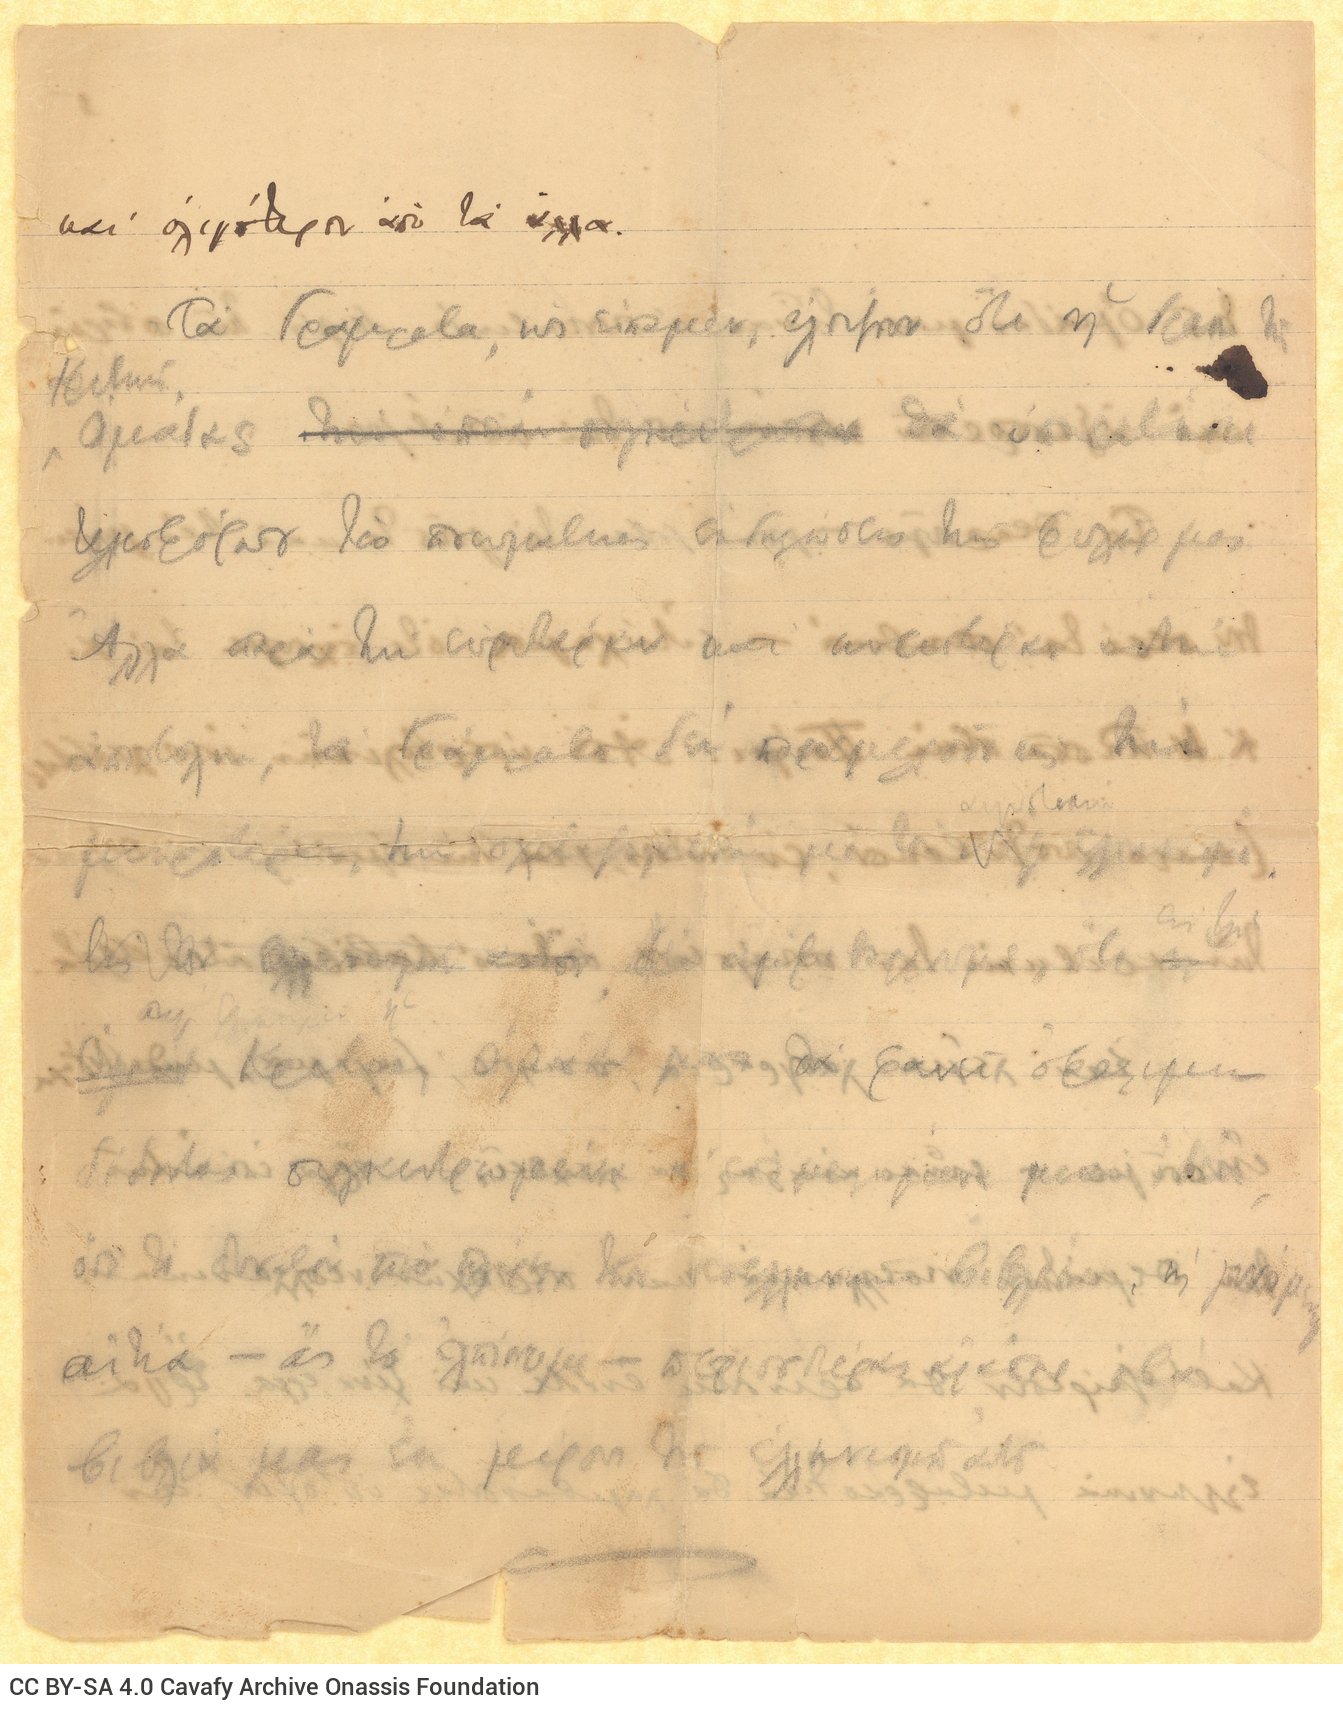 Fragment of a handwritten note by Cavafy on both sides of two ruled sheets, numbered 4 and 5. Mention of the "Group of cri